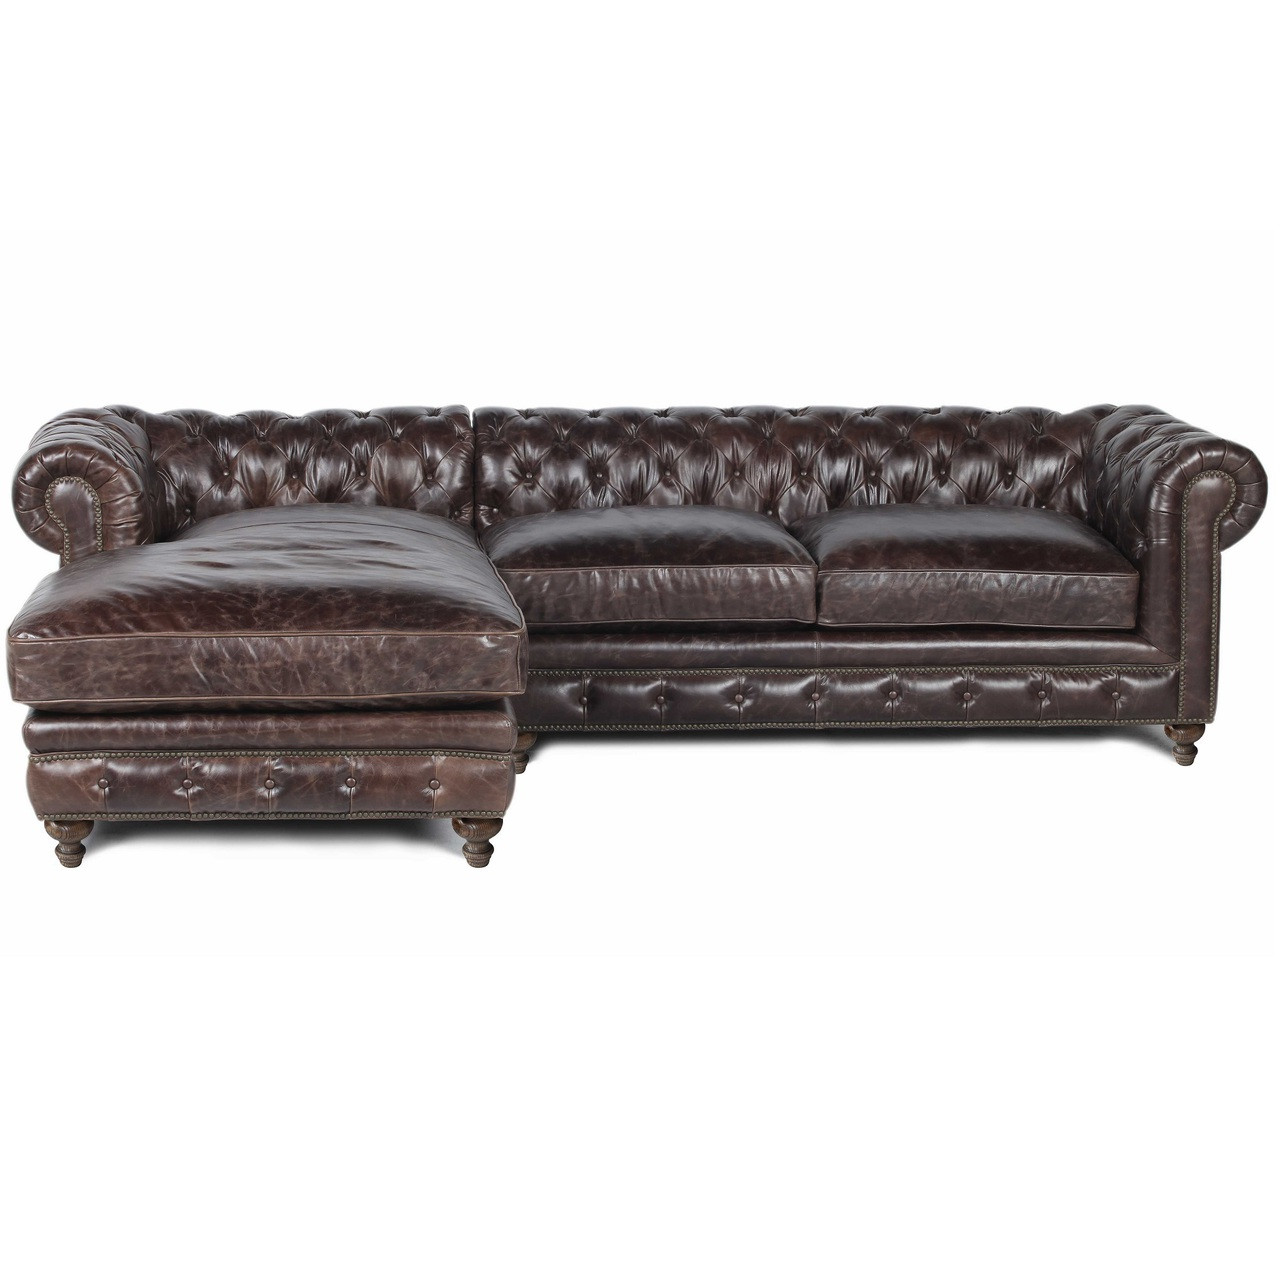 Zahara Tufted Silver Leather Chesterfield Sofa Zin Home